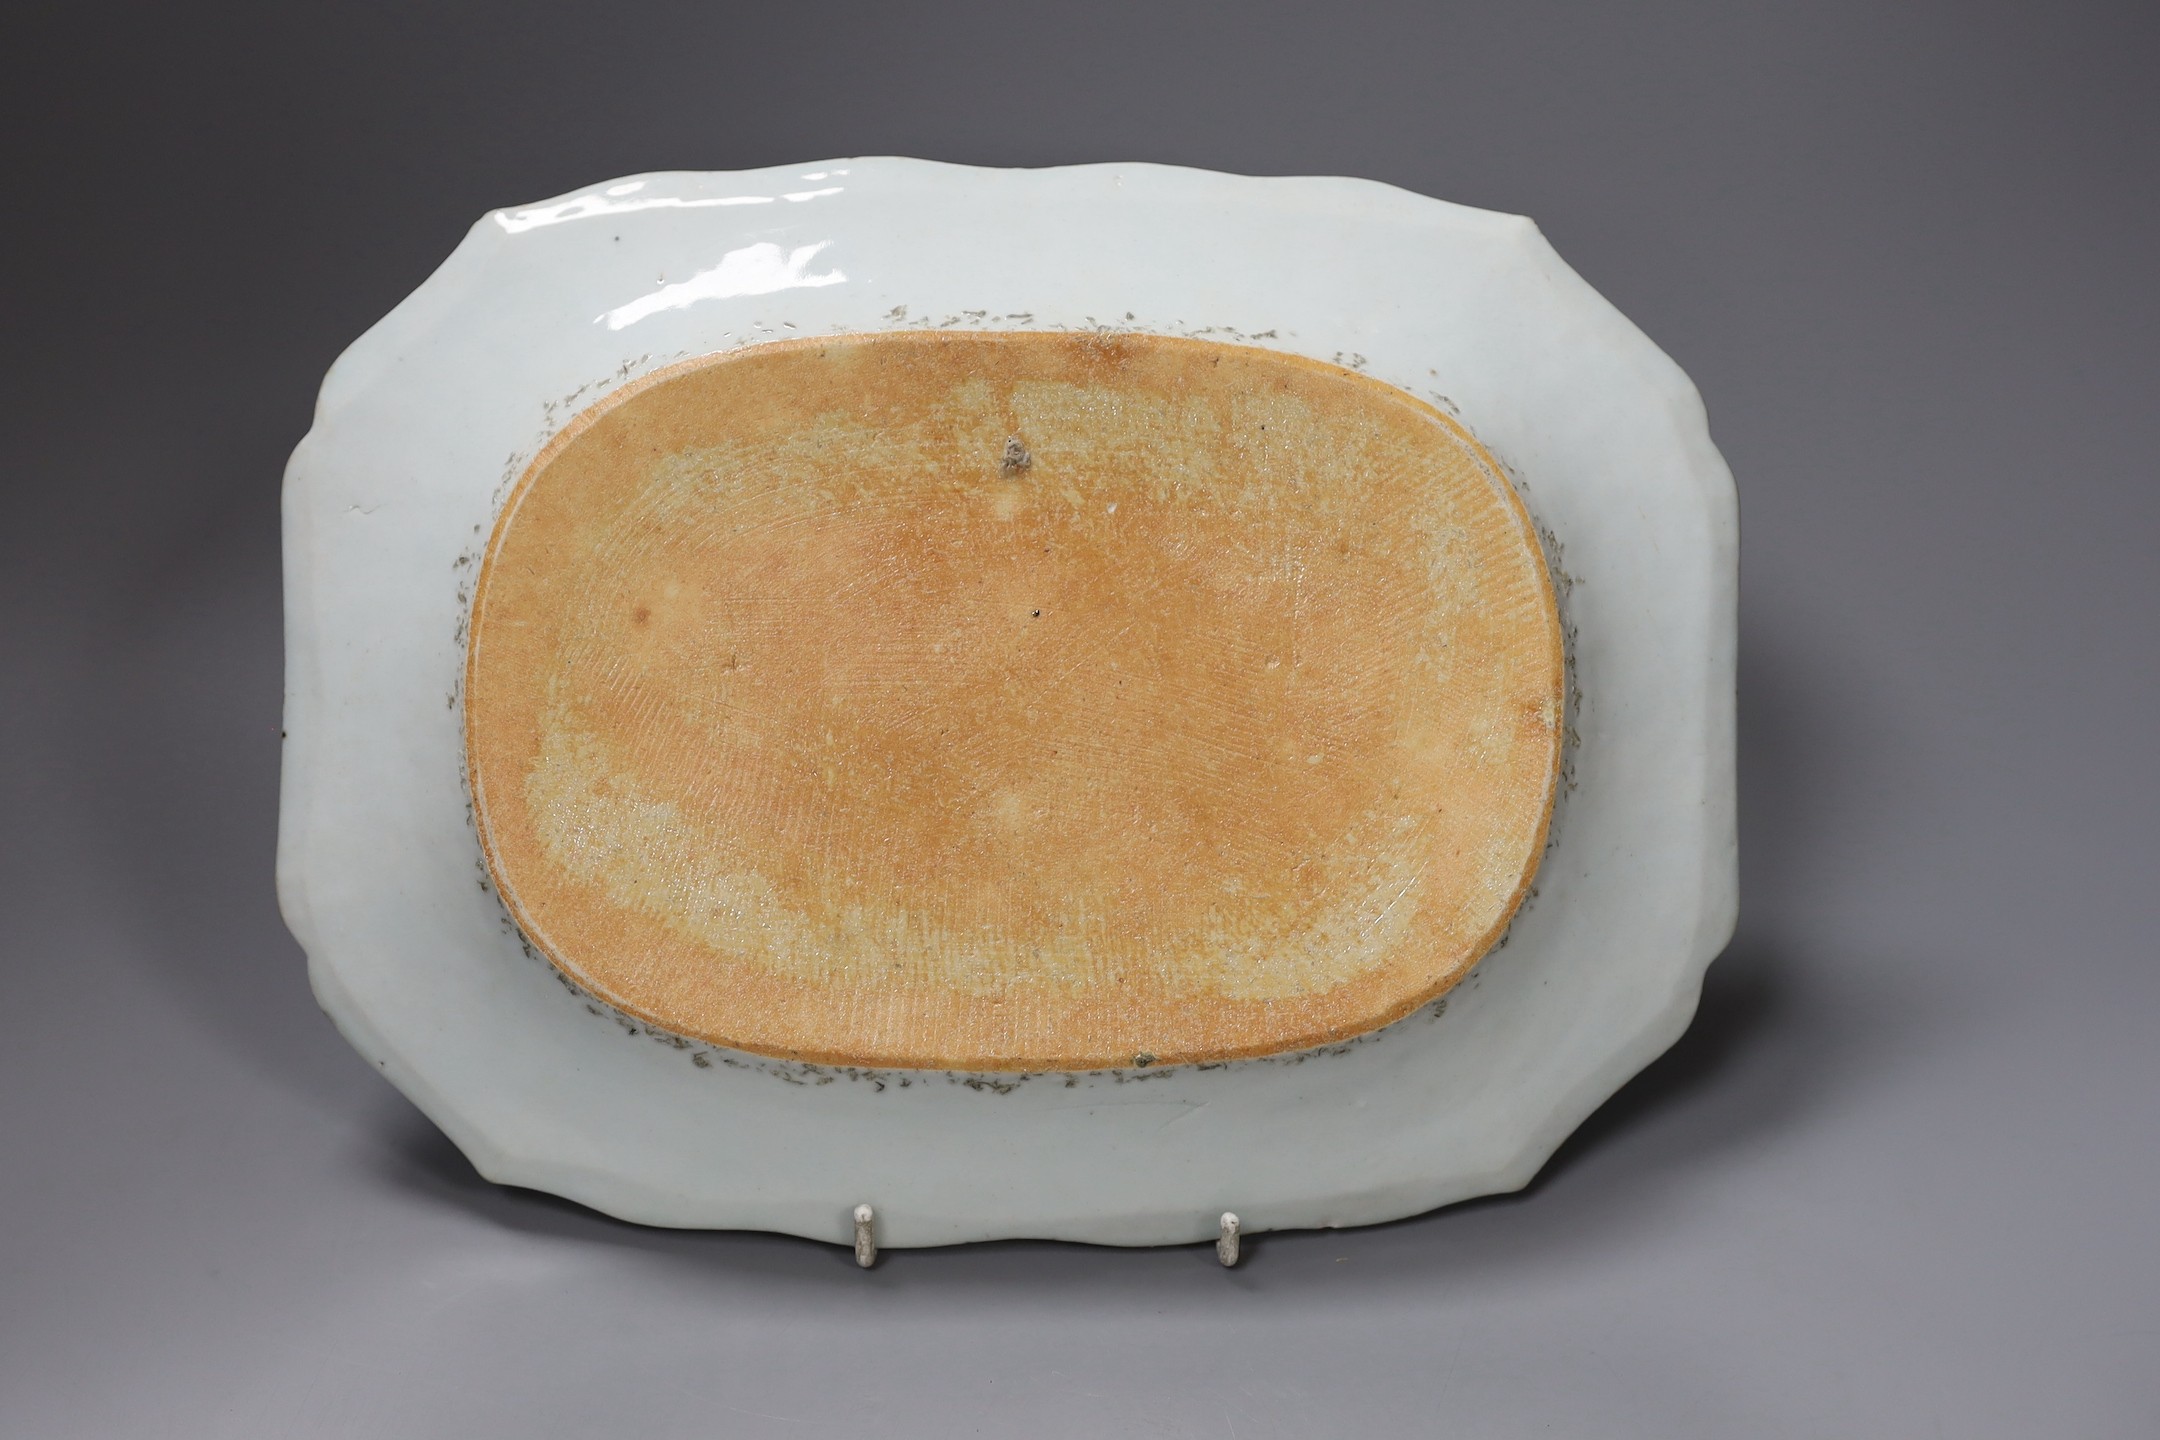 An 18th century Chinese export octagonal famille rose dish, 30cm long